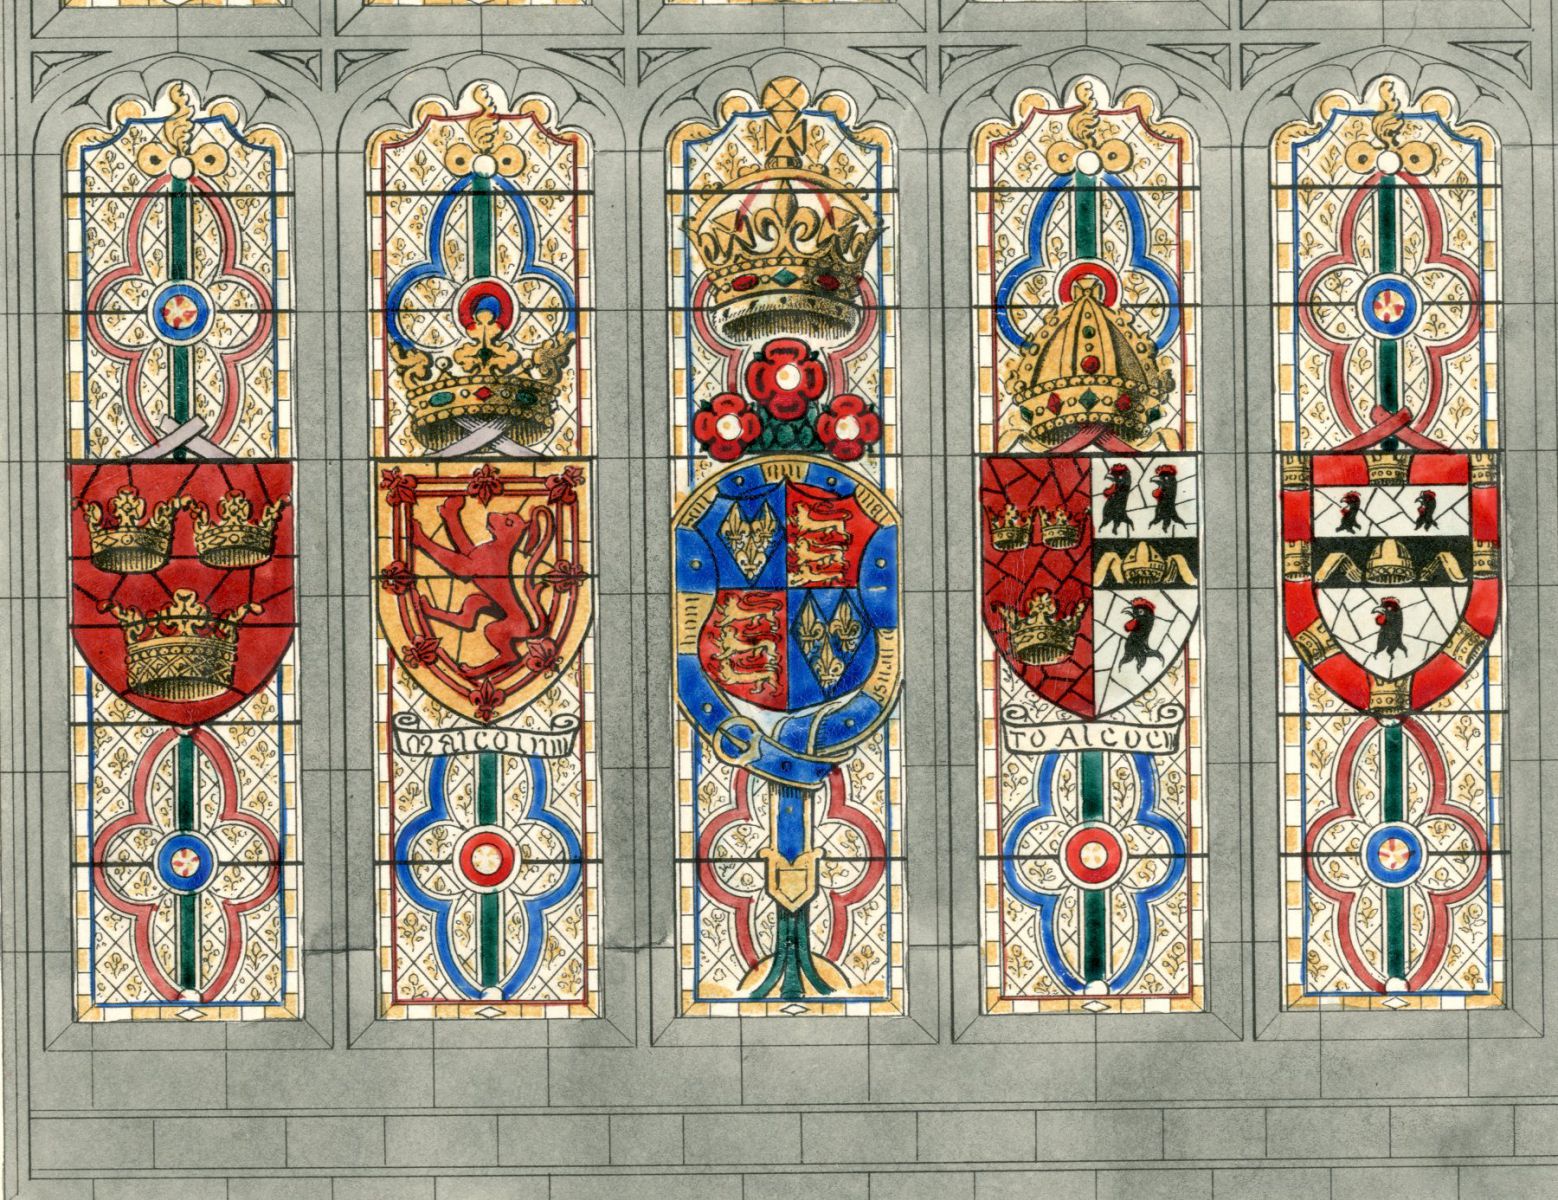 Coloured 1830s engraving showing bottom half of east window